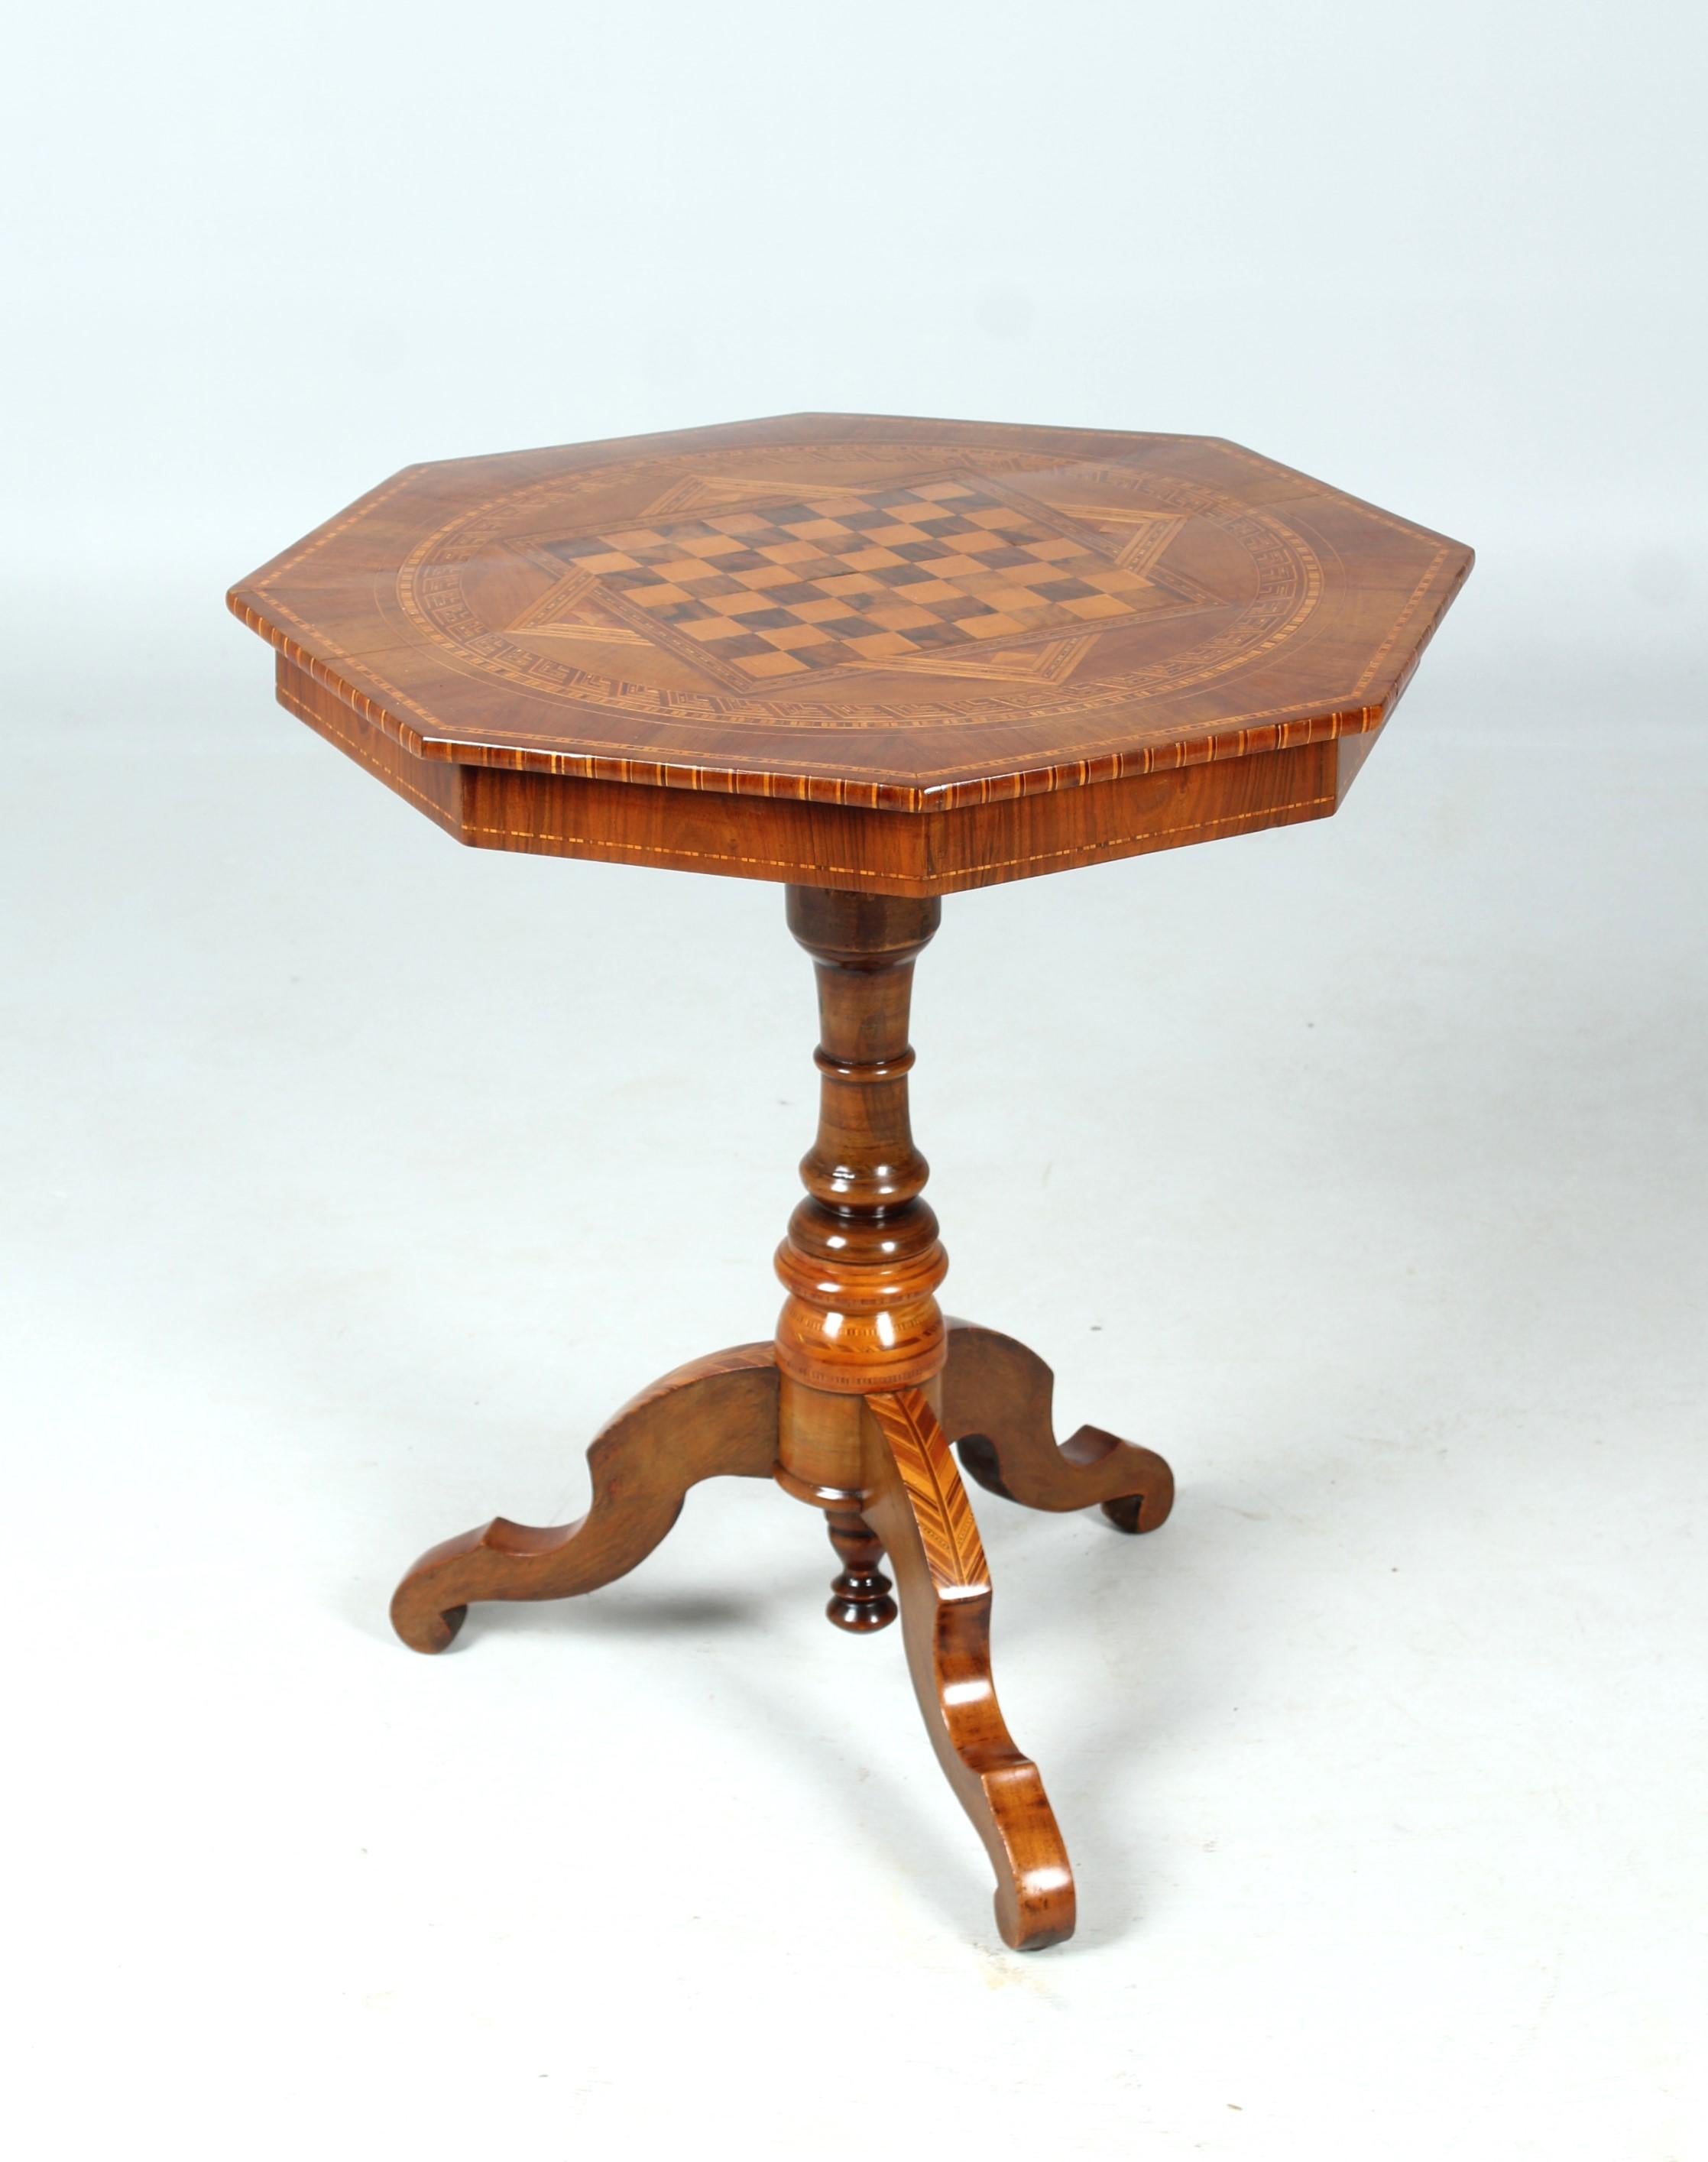 Antique chess table with marquetry and inlays

Italy
Walnut a.o.
second half of the 19th century.

Dimensions: H x W x D: 73 cm x 65 cm x 65 cm

Description:
Very richly inlaid and marked piece of furniture.
Three-piece base. Curved legs